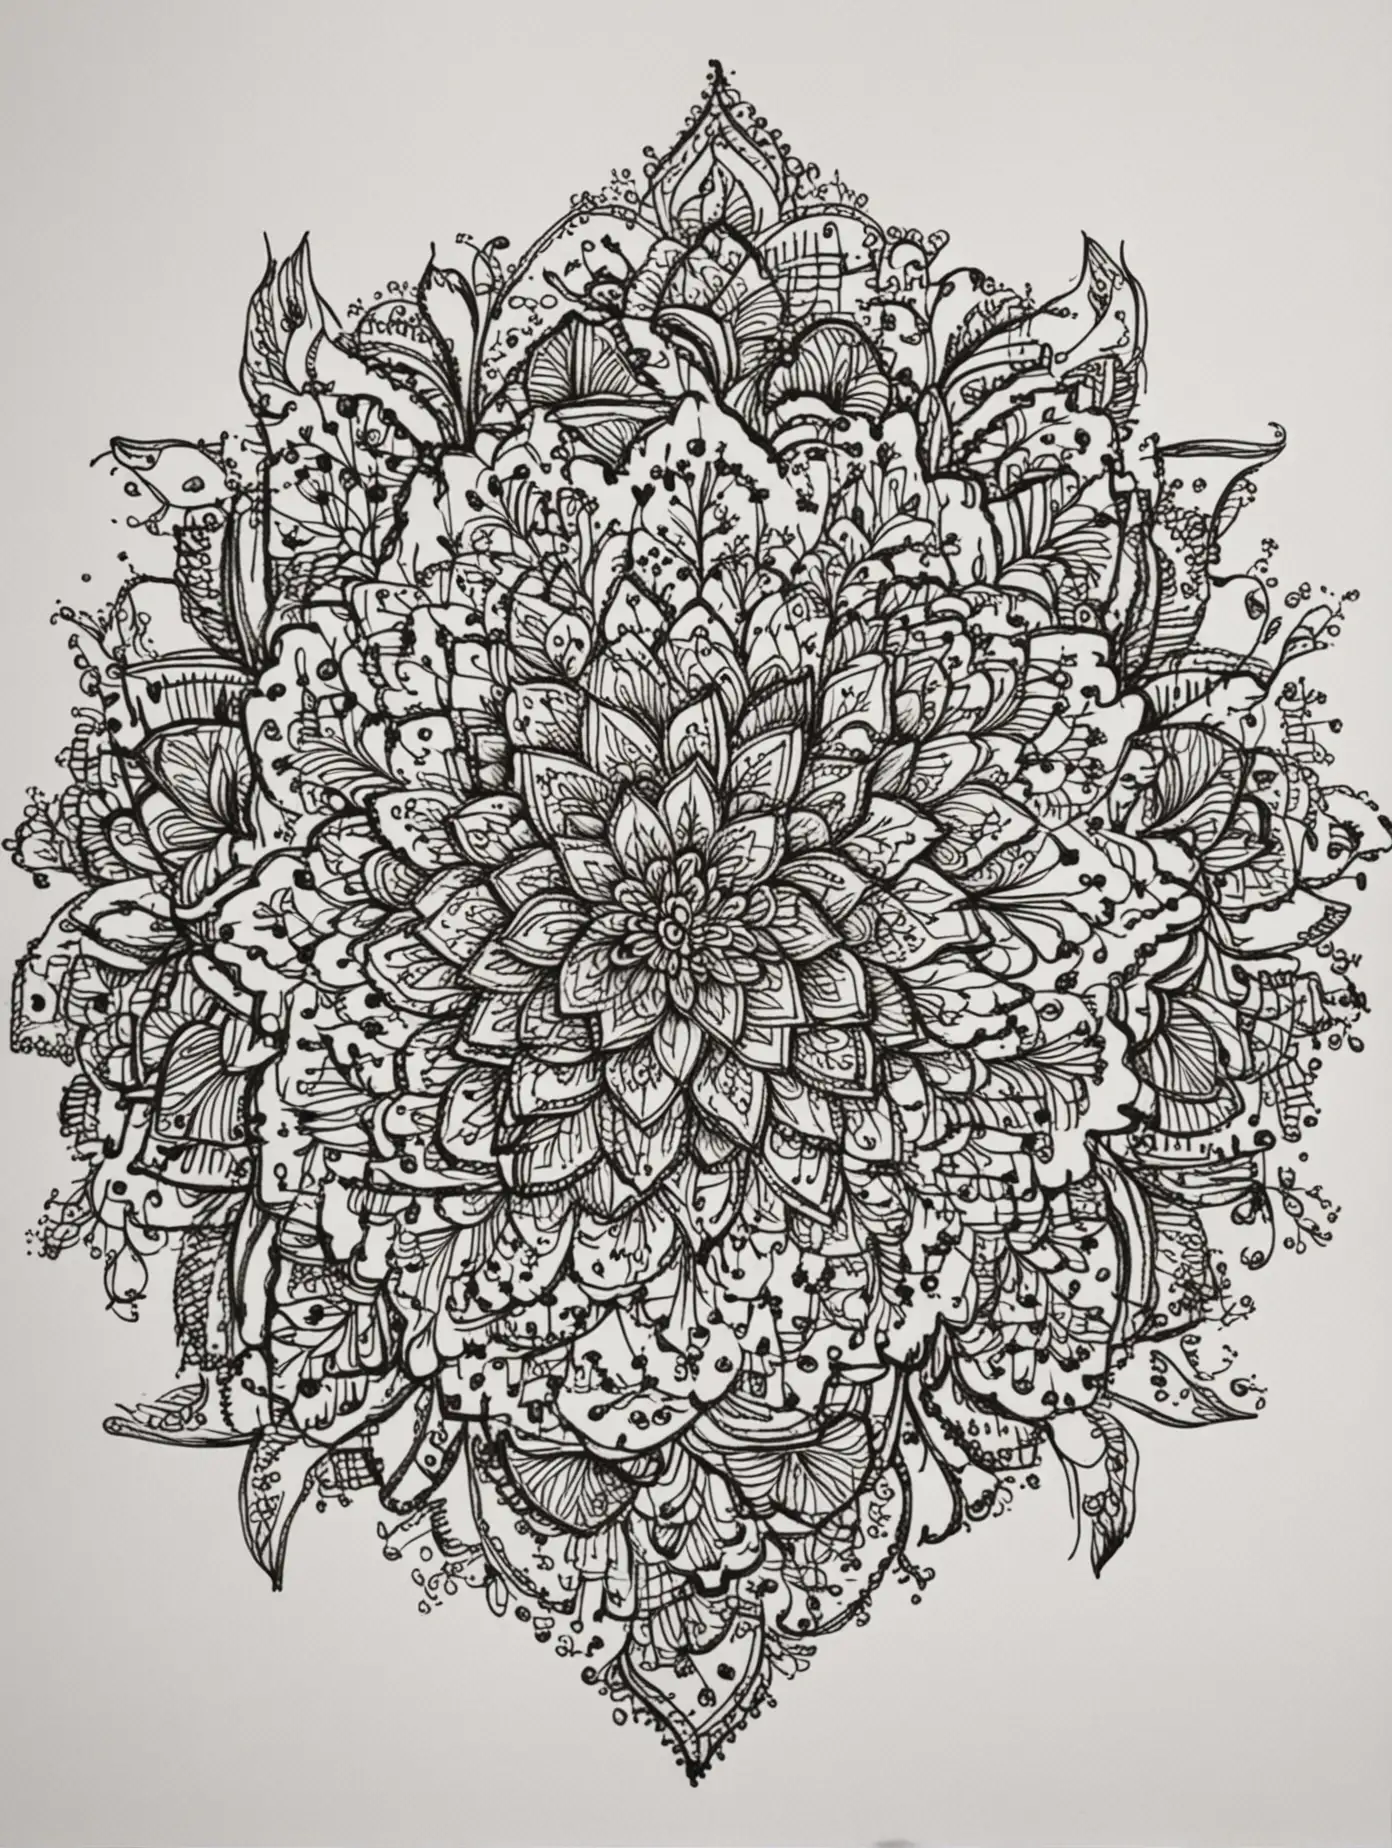 henna patterns , simple draw, no colors, symetrical flower, white background